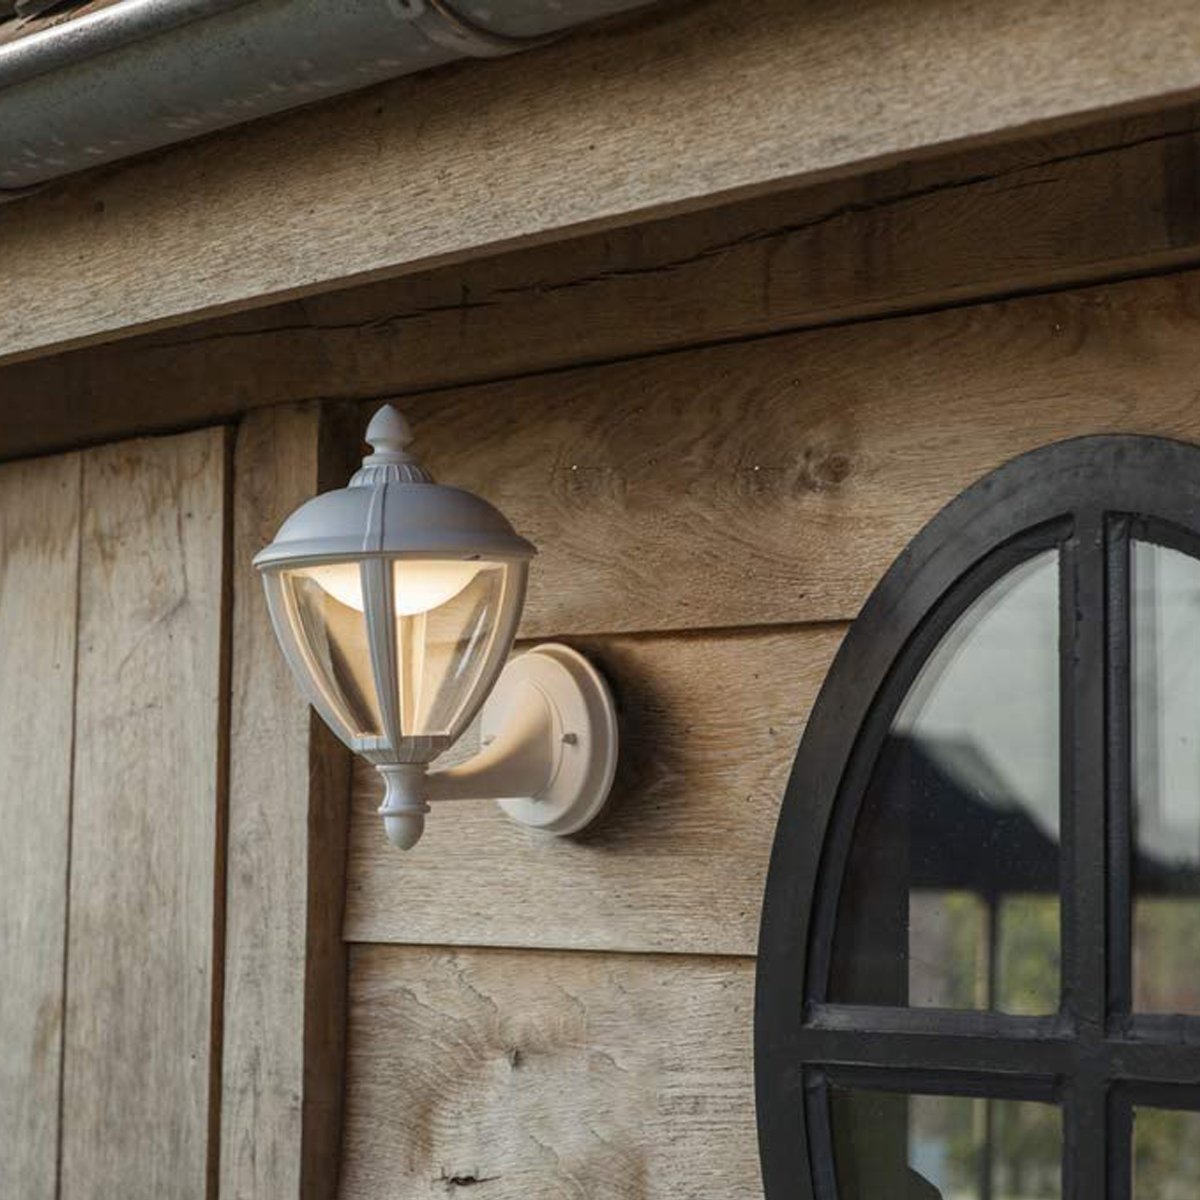 Our Cindy lantern wall light delivers on style and durability and is a smart choice for your exterior lighting. With its white aluminium construction teamed with clear panes, this lantern is hardwearing and rust and weatherproof. Built for life outdoors, it has an IP44 rating which means it can withstand the harshest of weather conditions. For sophisticated yet robust outdoor lighting, our Cindy white outdoor traditional lantern is a strong contender.